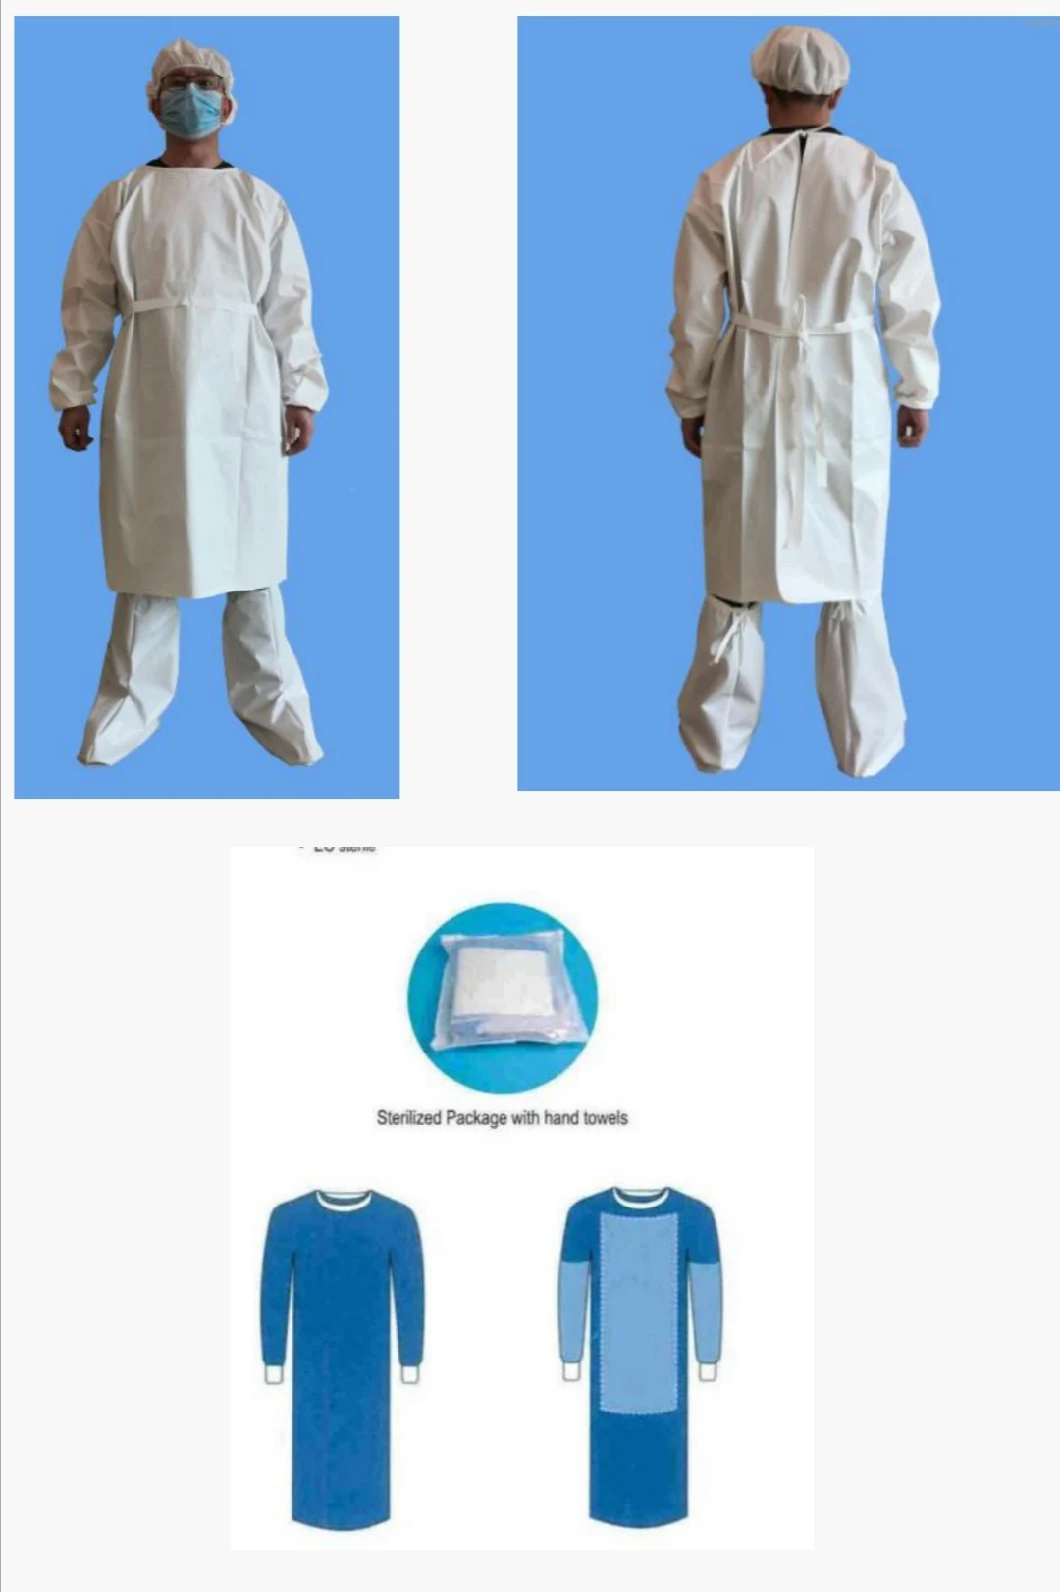 Non Woven/SMS/CPE Scrub Gown/Surigical Gown/Surgeon Gown/PP Sterile Dental Gown/ Disposable Surgical Gown, Isolation Gown, Disposable Patient Gown